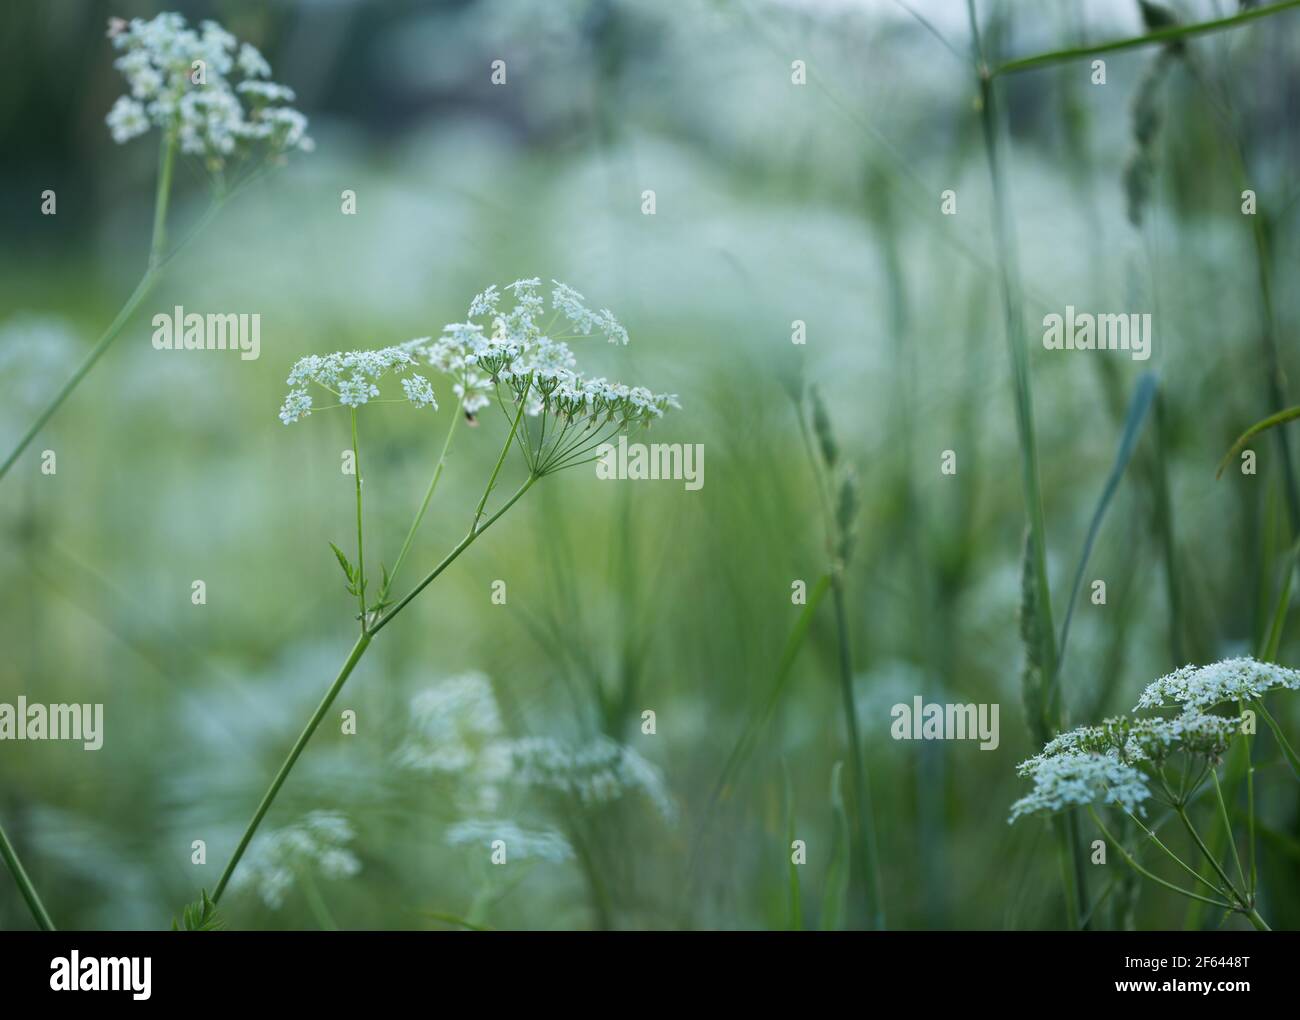 Blooming caraway, Carum carvi or meridian fennel Stock Photo